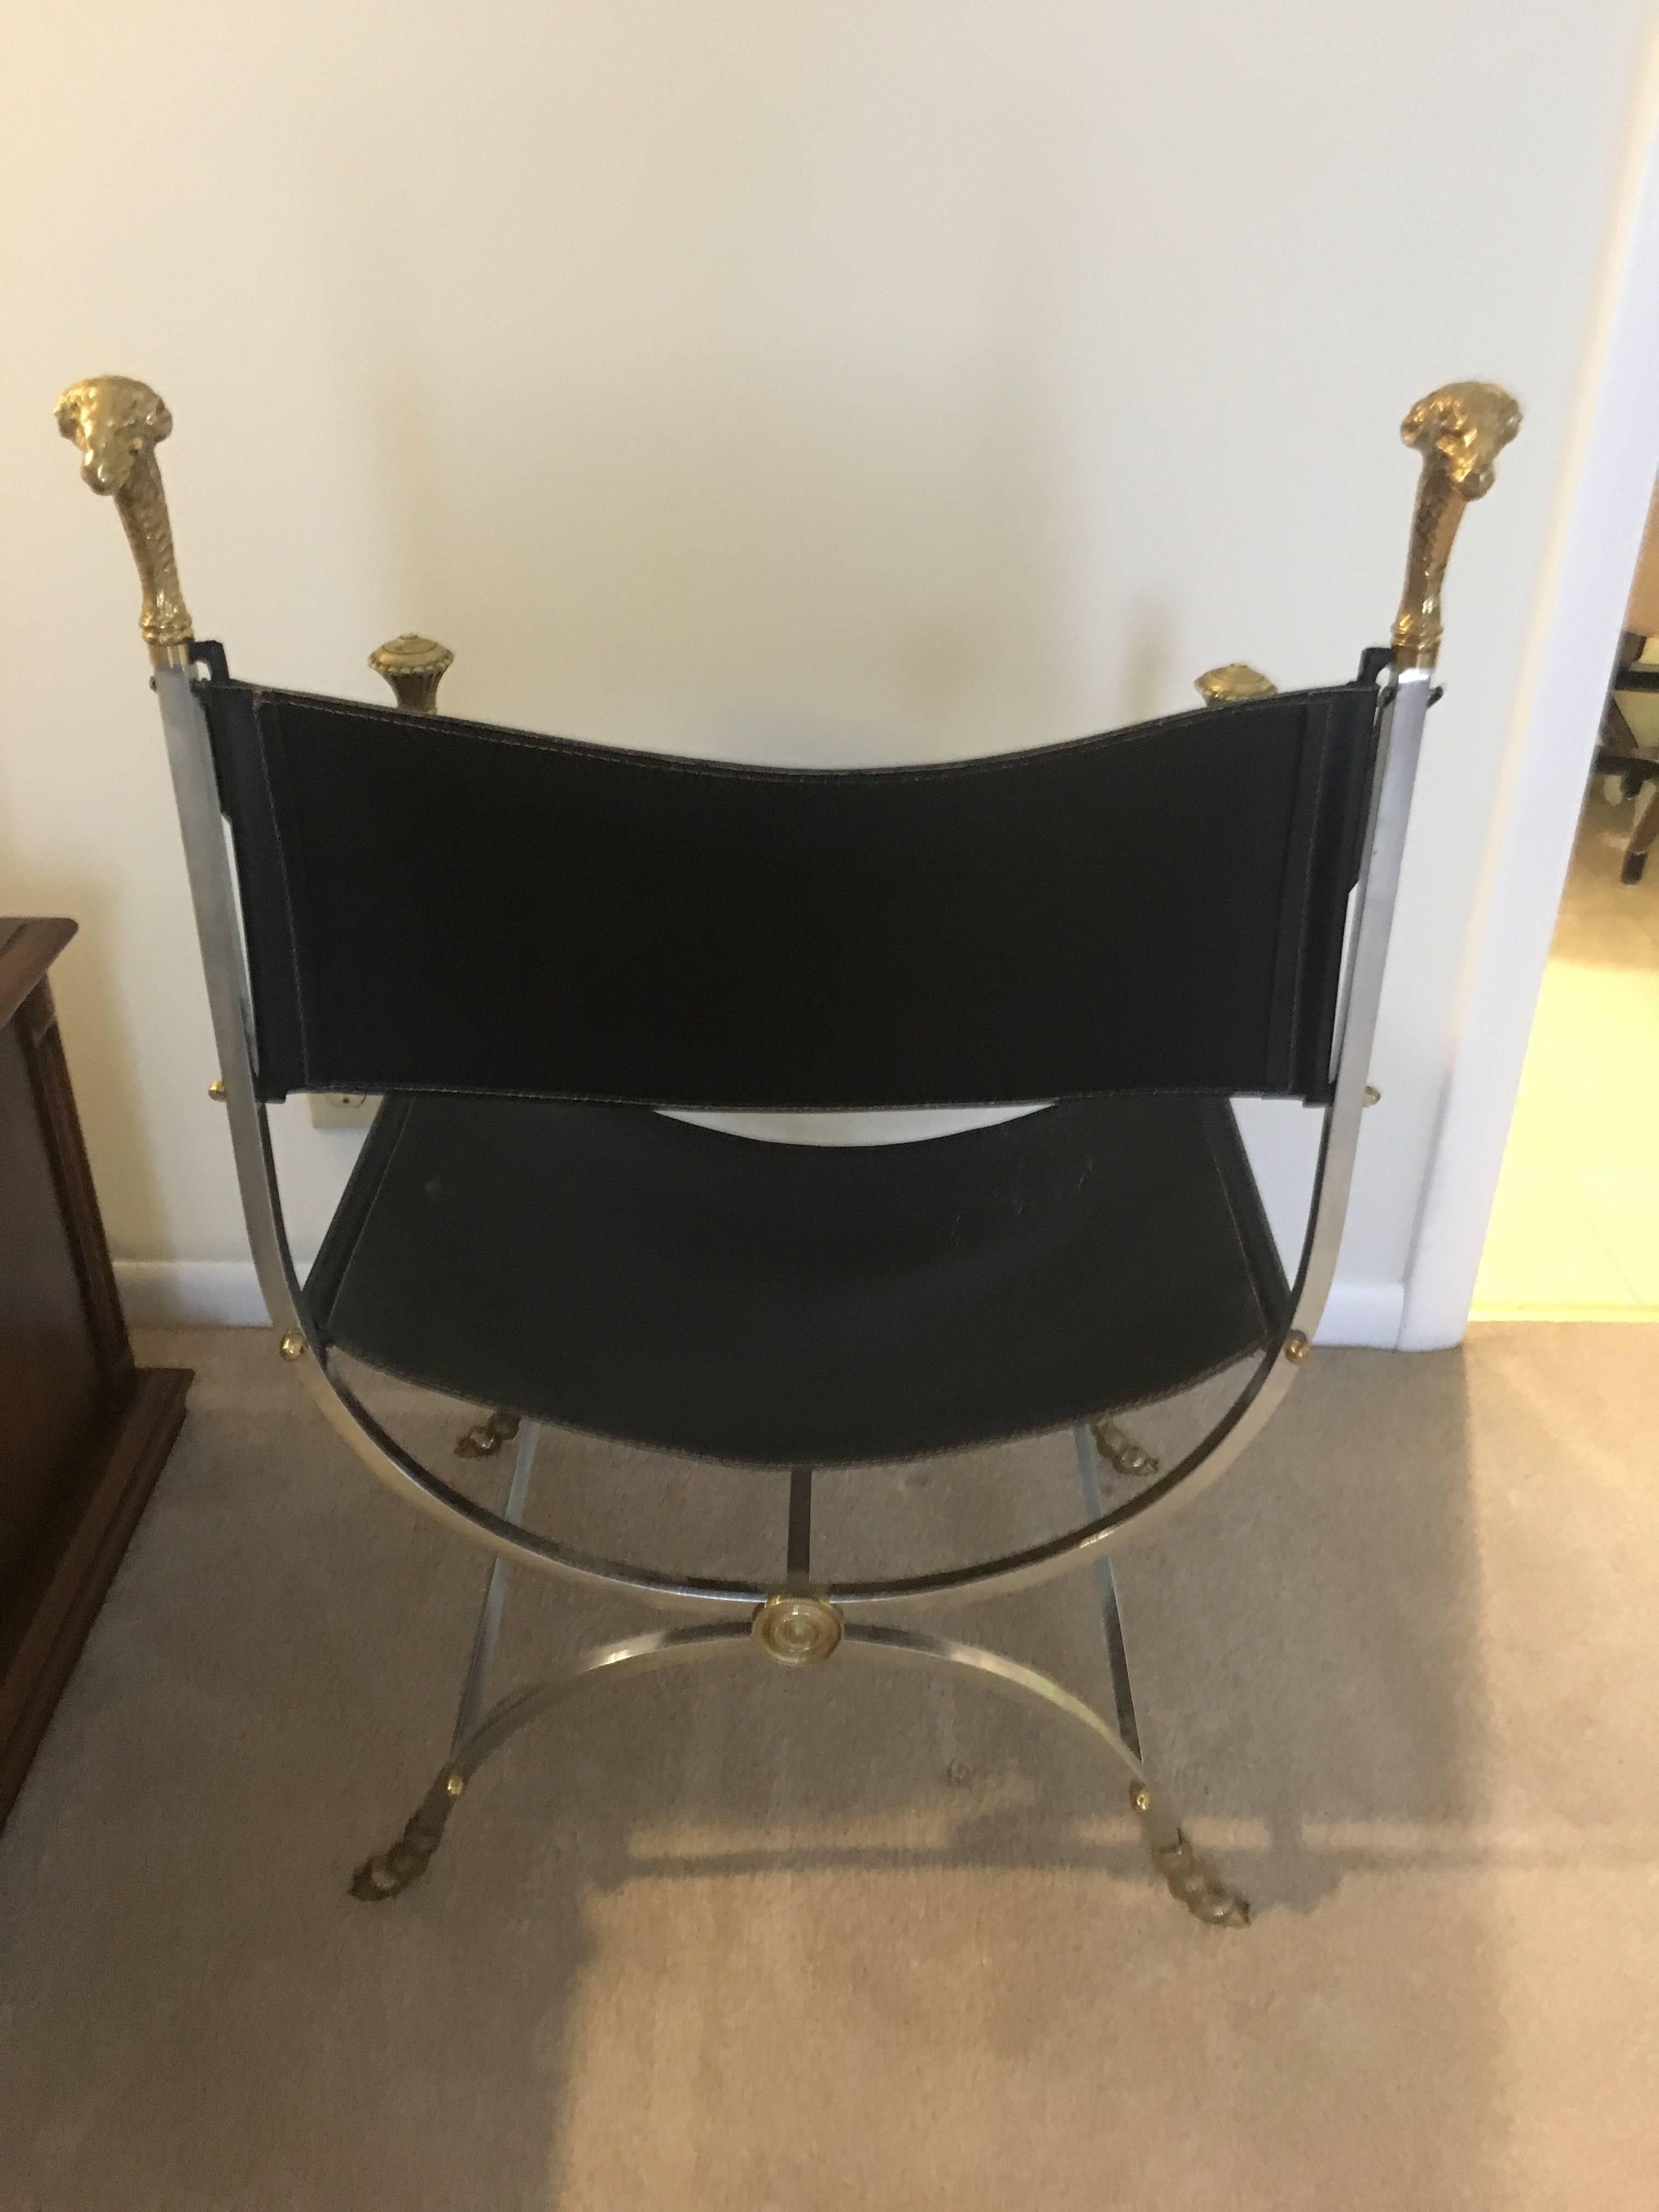 Beautiful Maison Jansen brass, polished steel and leather Savonarola chair. A fine example of Maison Jansen's detailing, from brass hoof feet to Medallions and finials on the arm and back. The rams are magnificent.

Introduced in the 1970s the chair